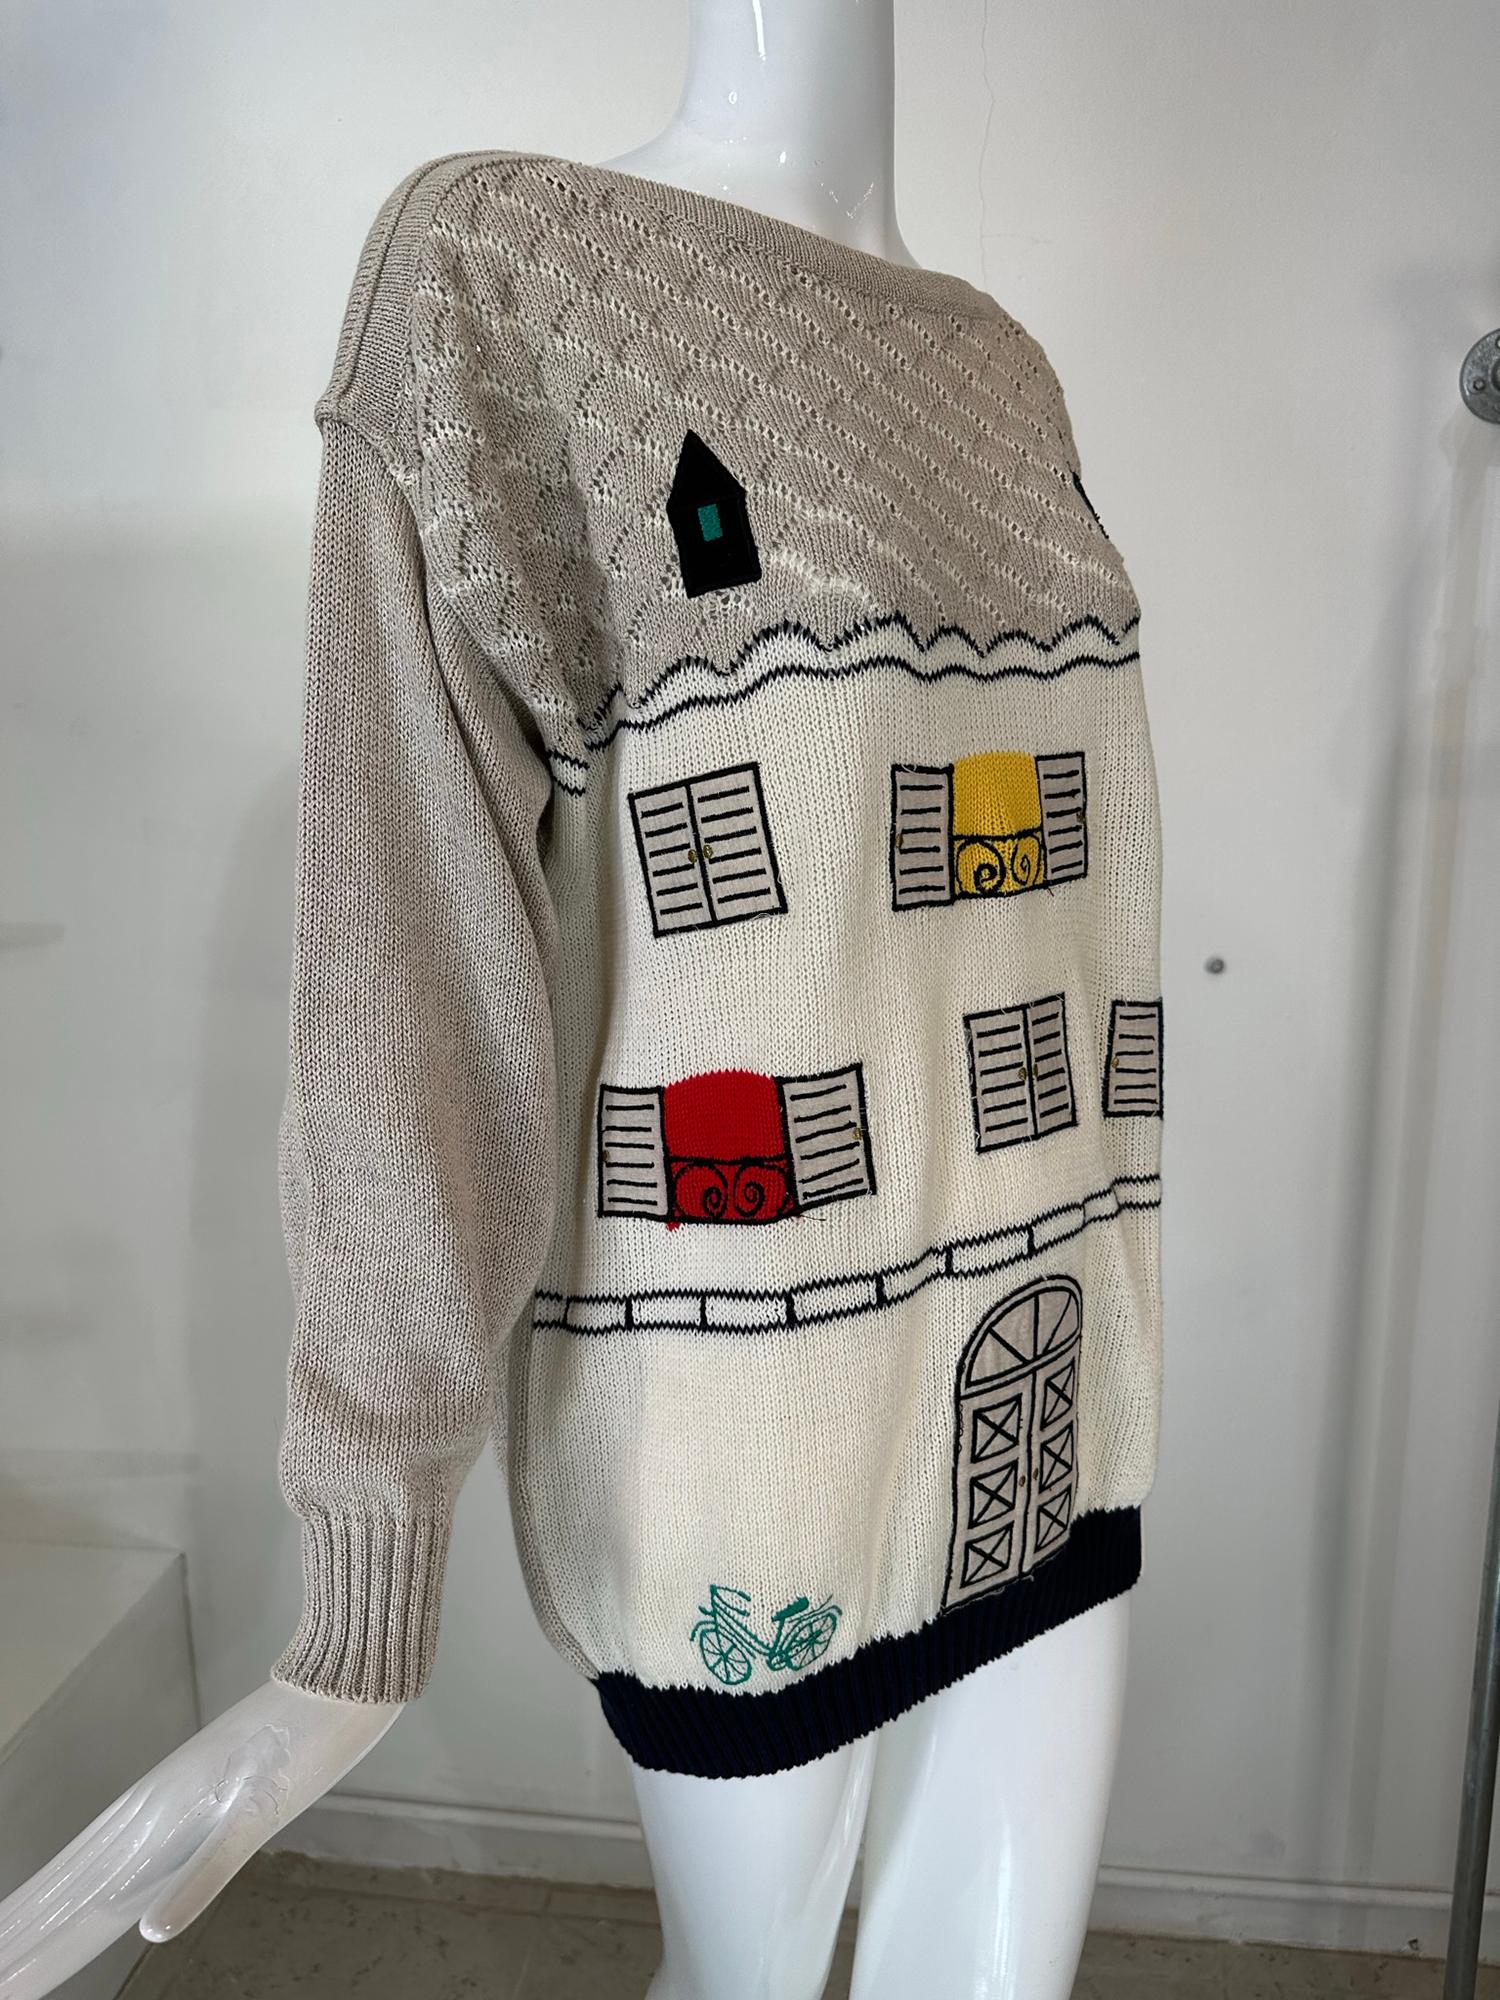 Jean-Charles de Castelbajac natural linen knit applique house with cat pullover sweater marked size 44. Pull on sweater is appliqued at the front with a charming house, the roof at the top has a cat on one side & an attic window on the other, the